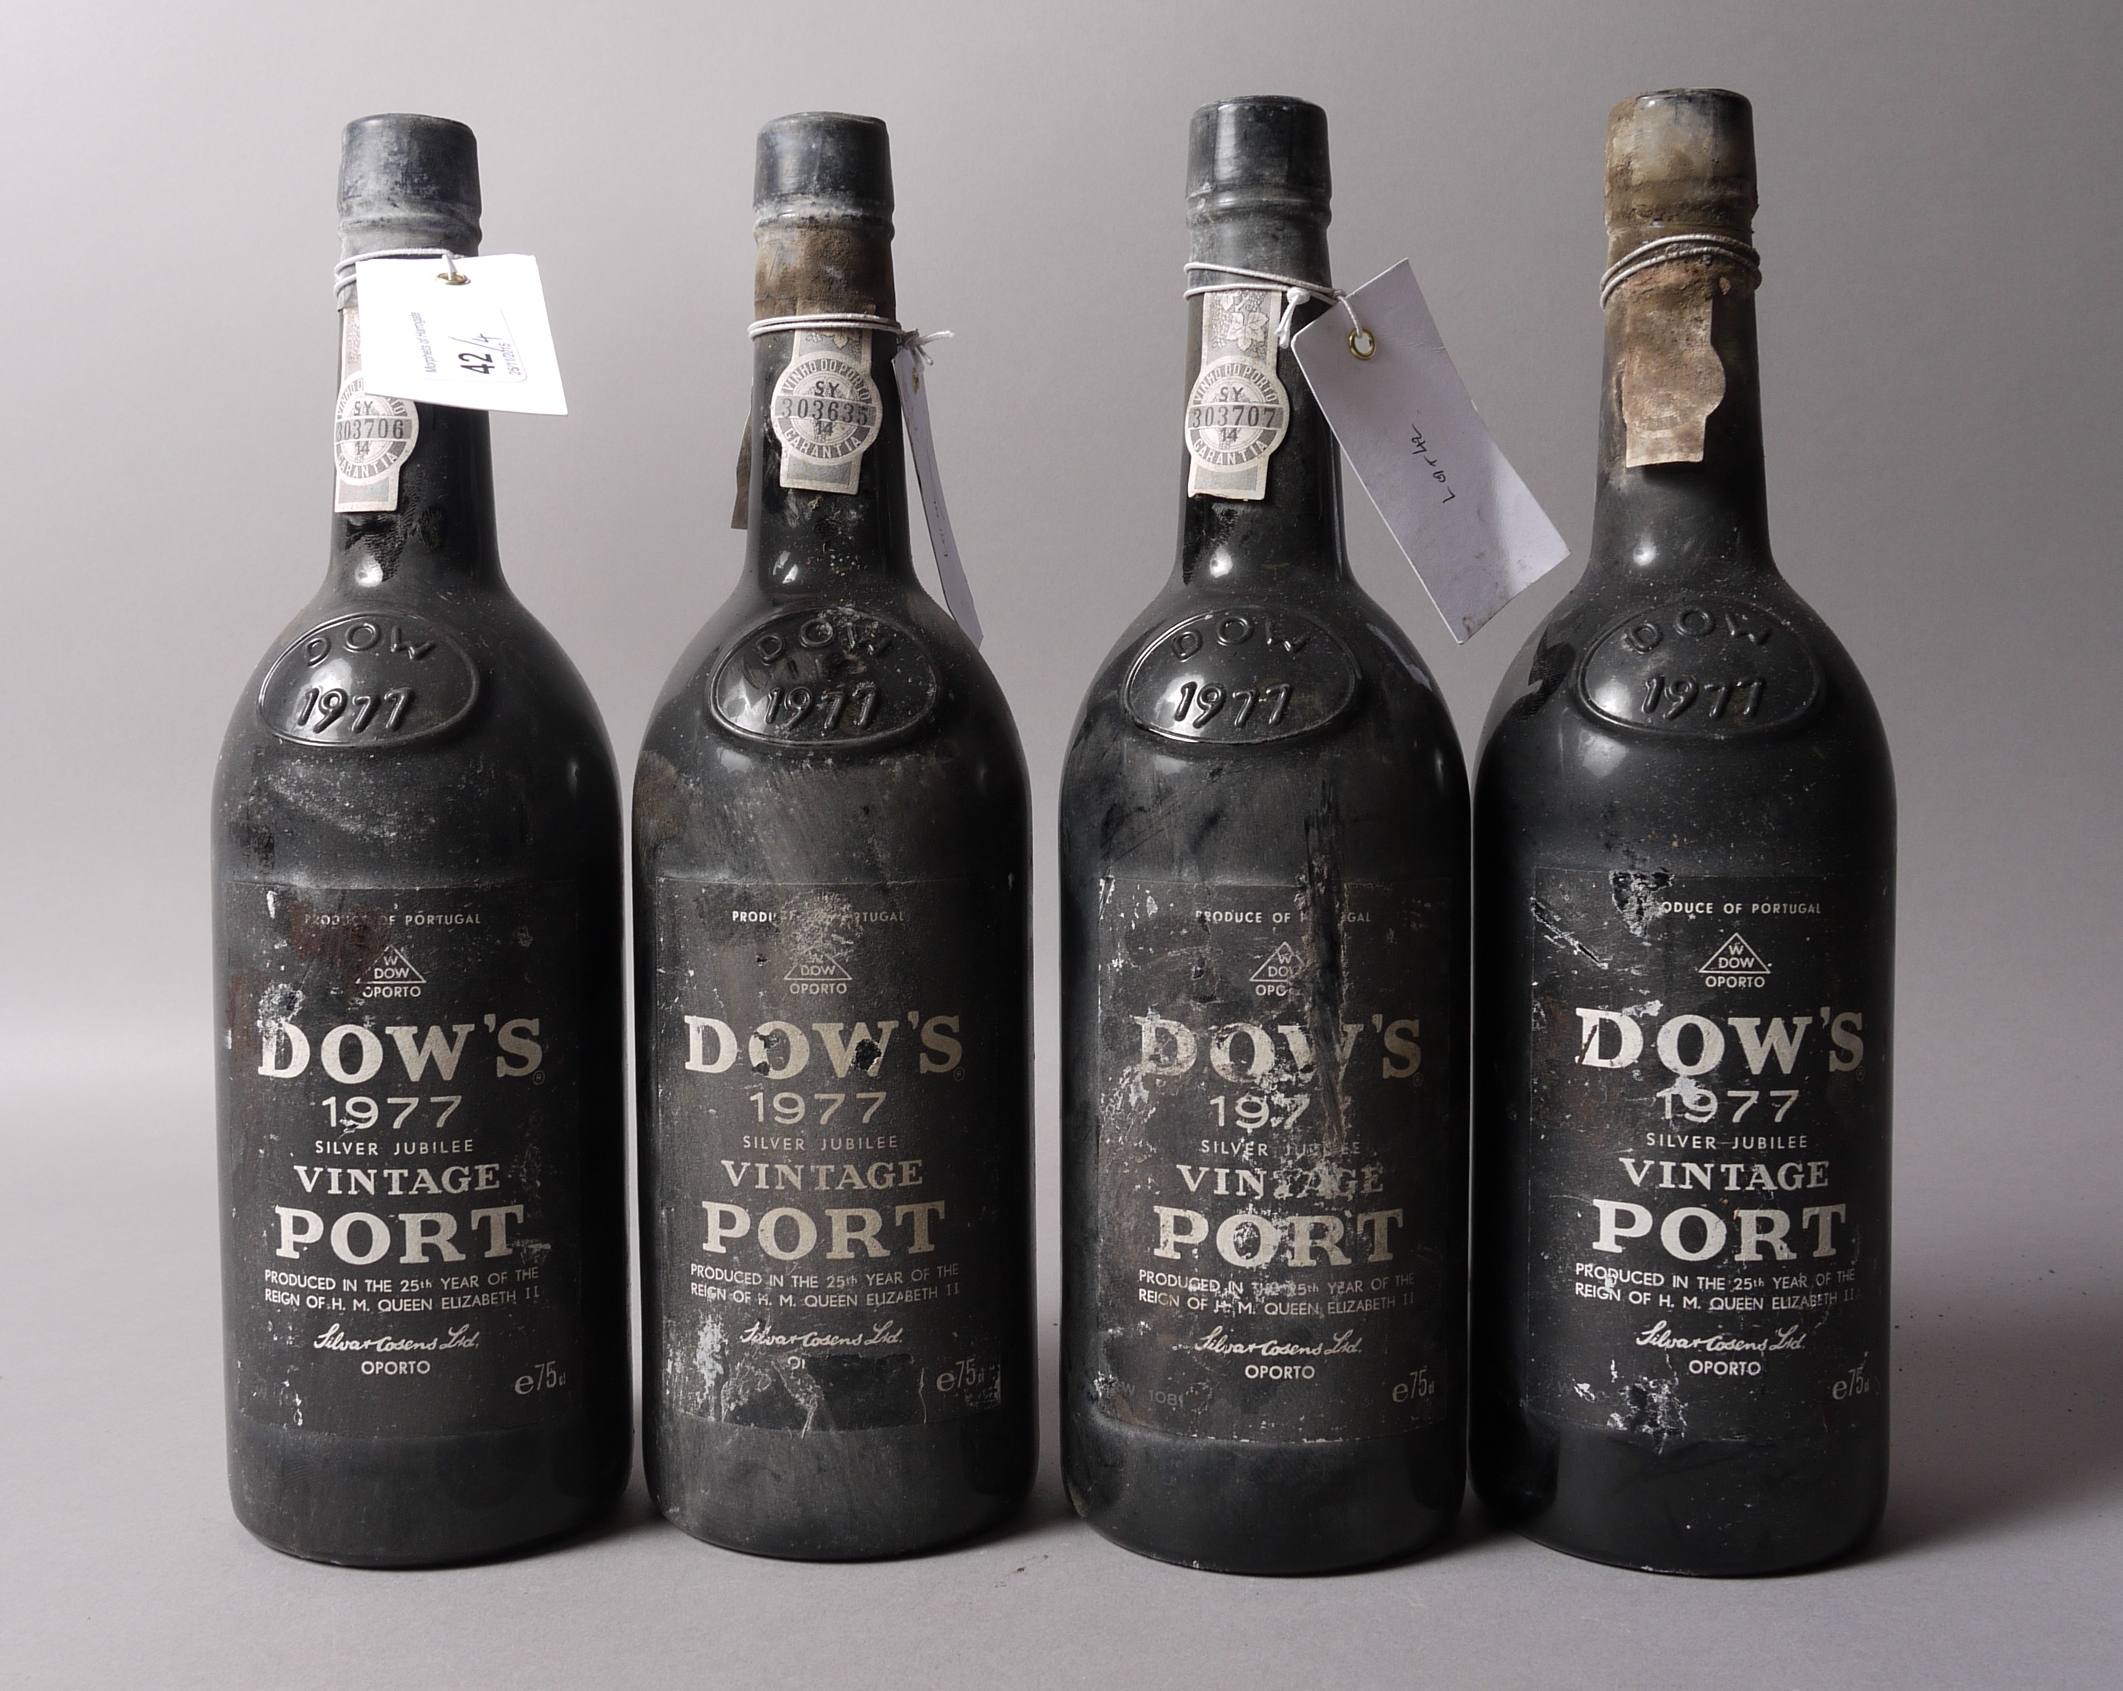 Dow's 1977 Vintage Port, 4 bottles, labels scuffed, - Image 2 of 2